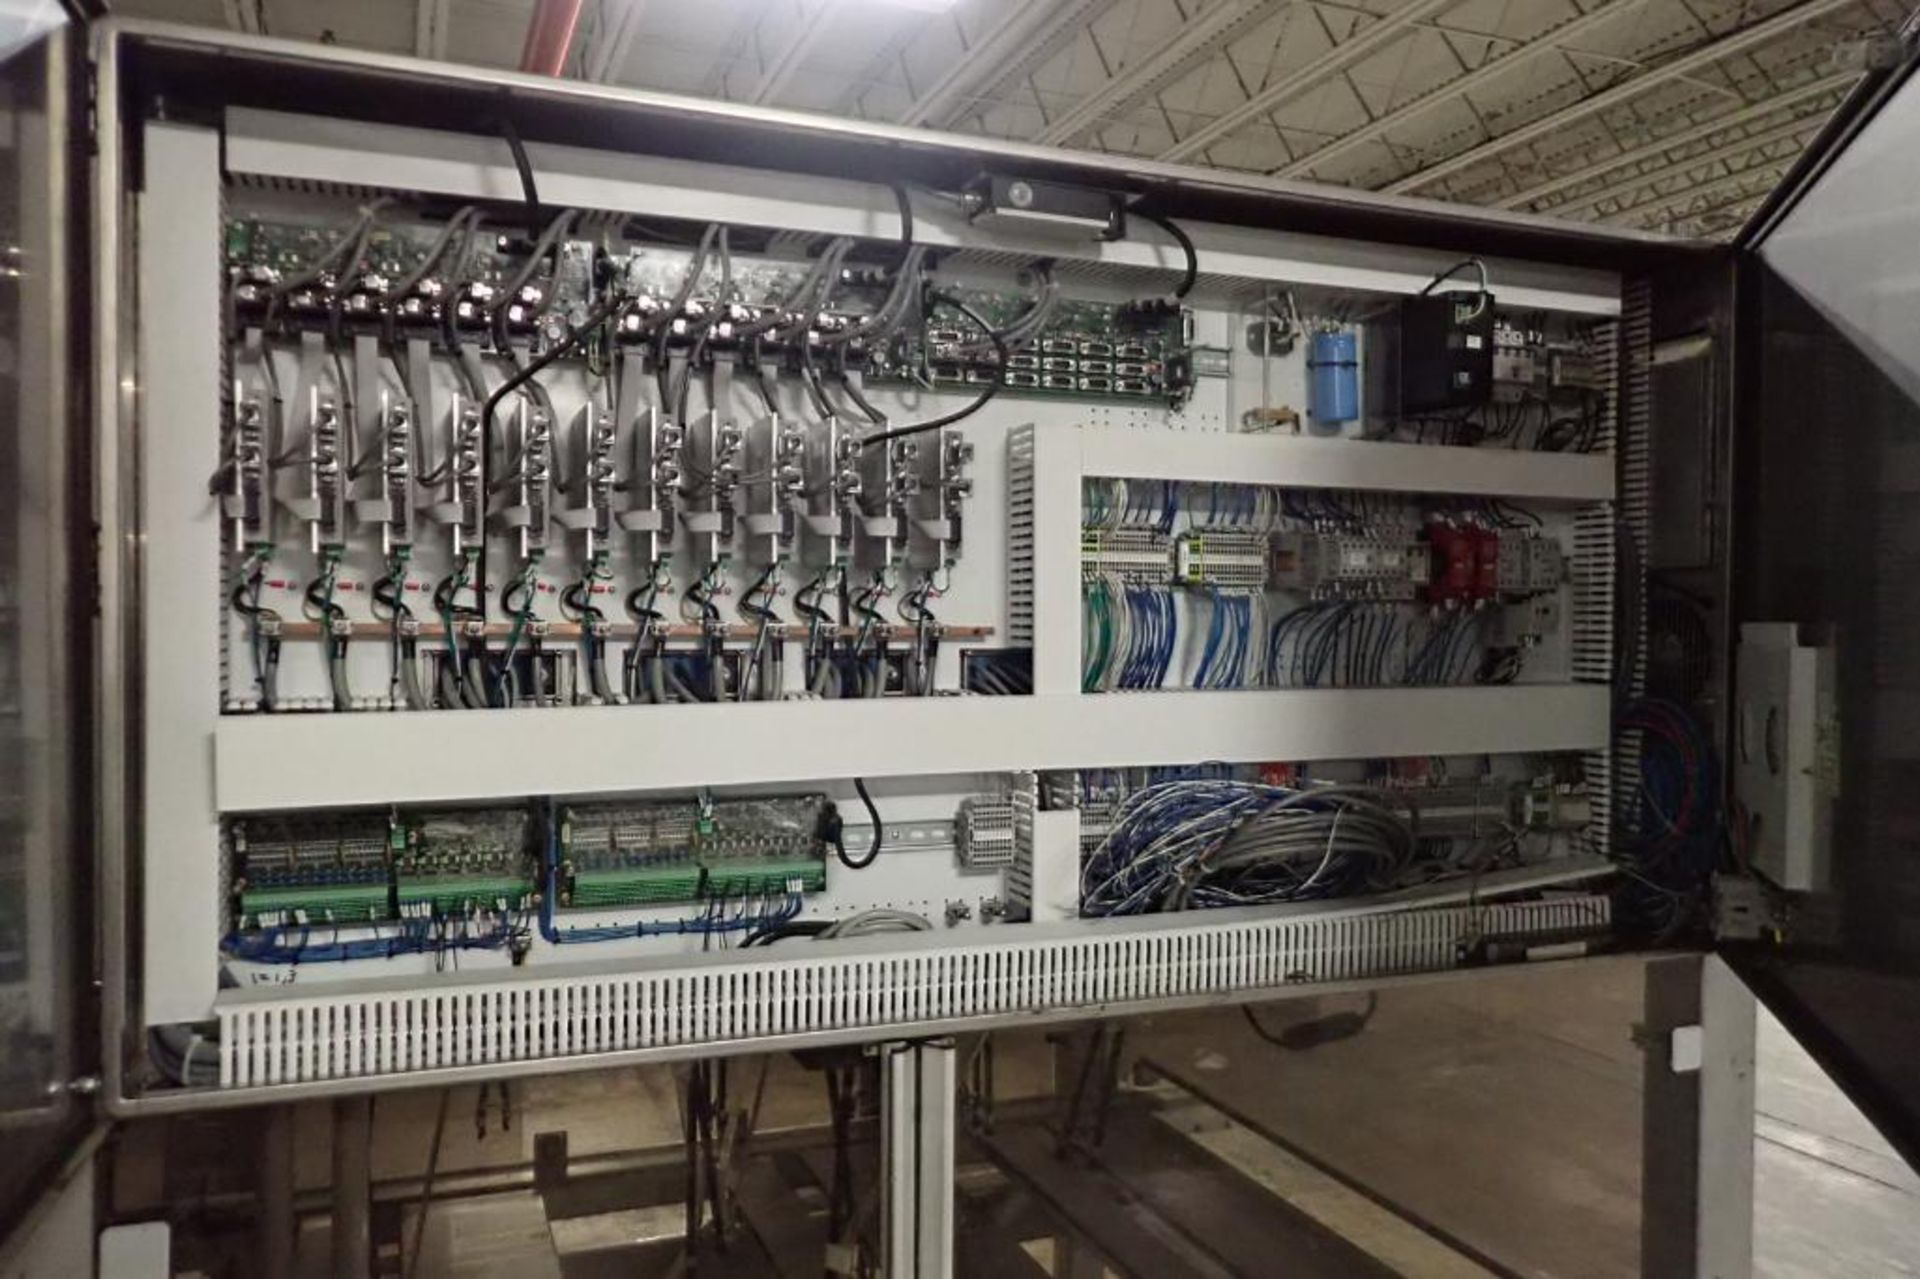 Bosch Doboy delfi feed placer {Located in Indianapolis, IN} - Image 13 of 20